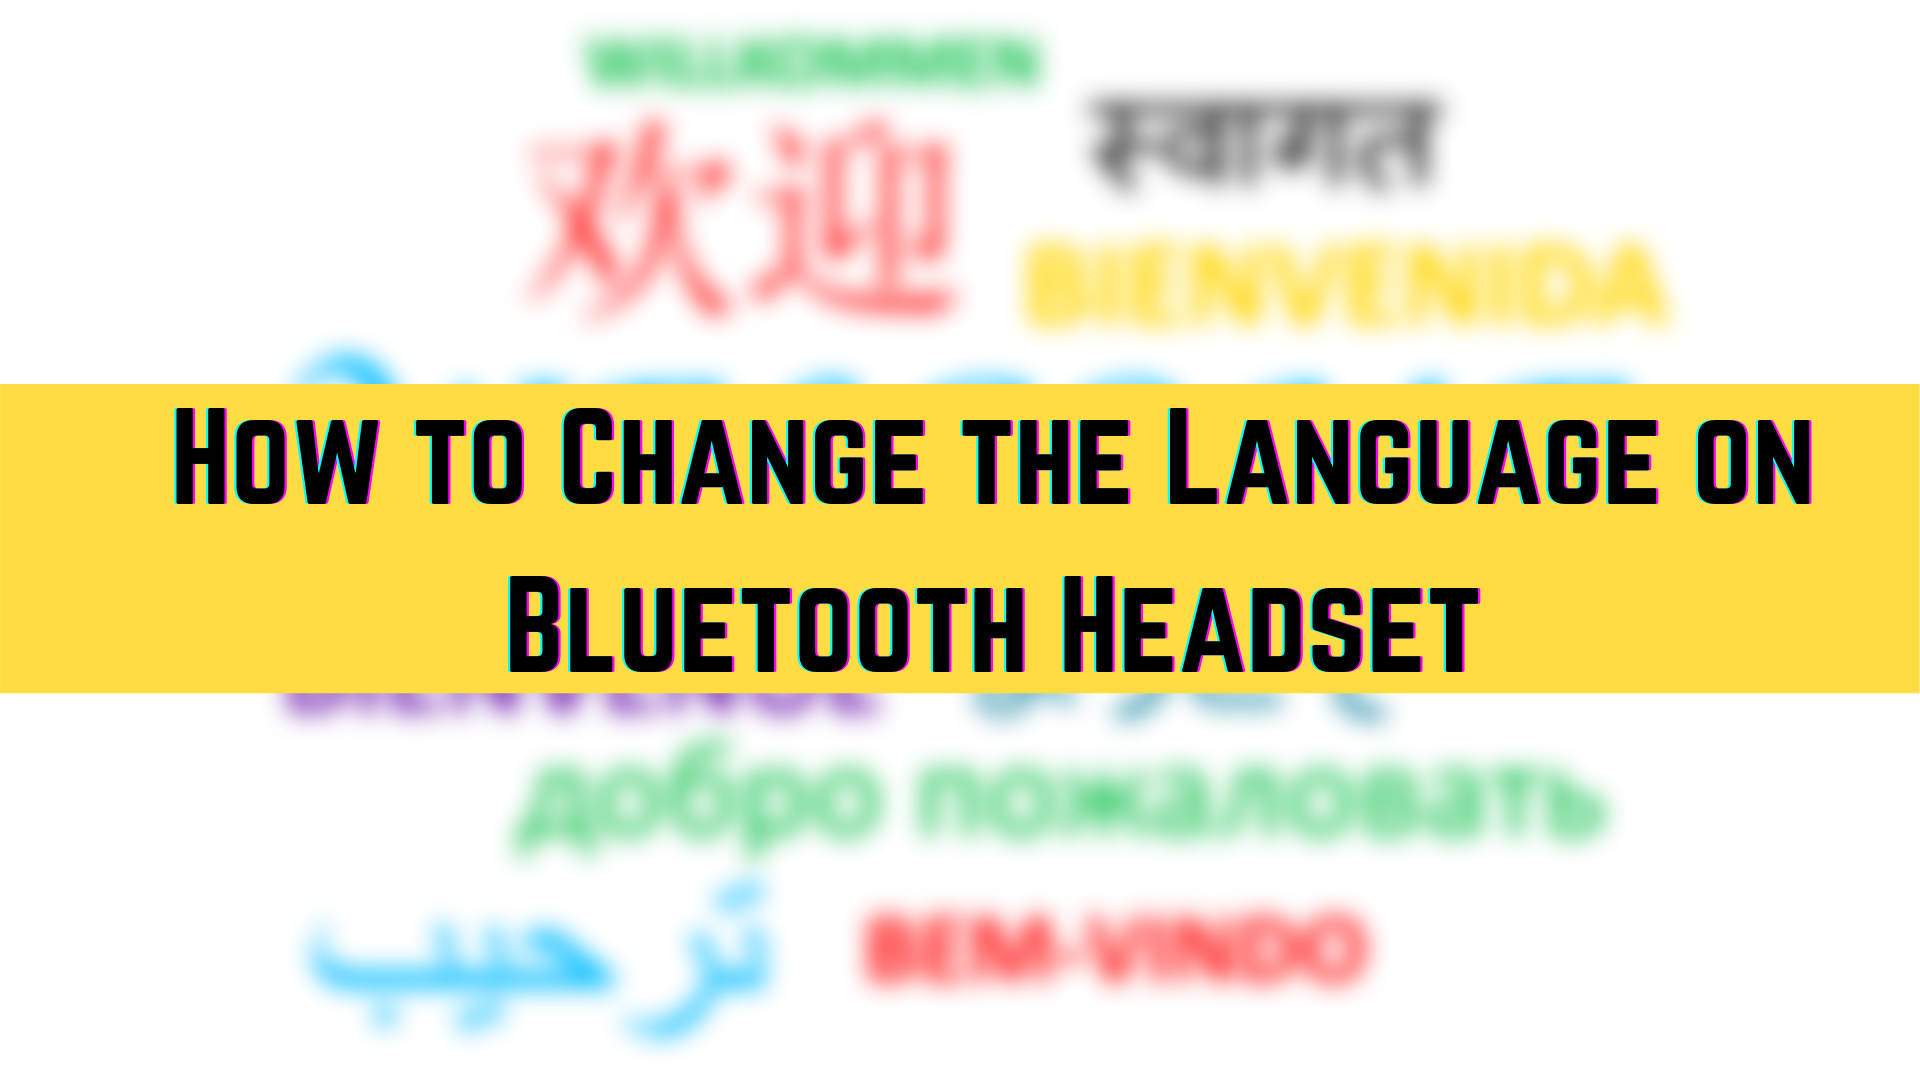 How to Change the Language on Bluetooth Headset